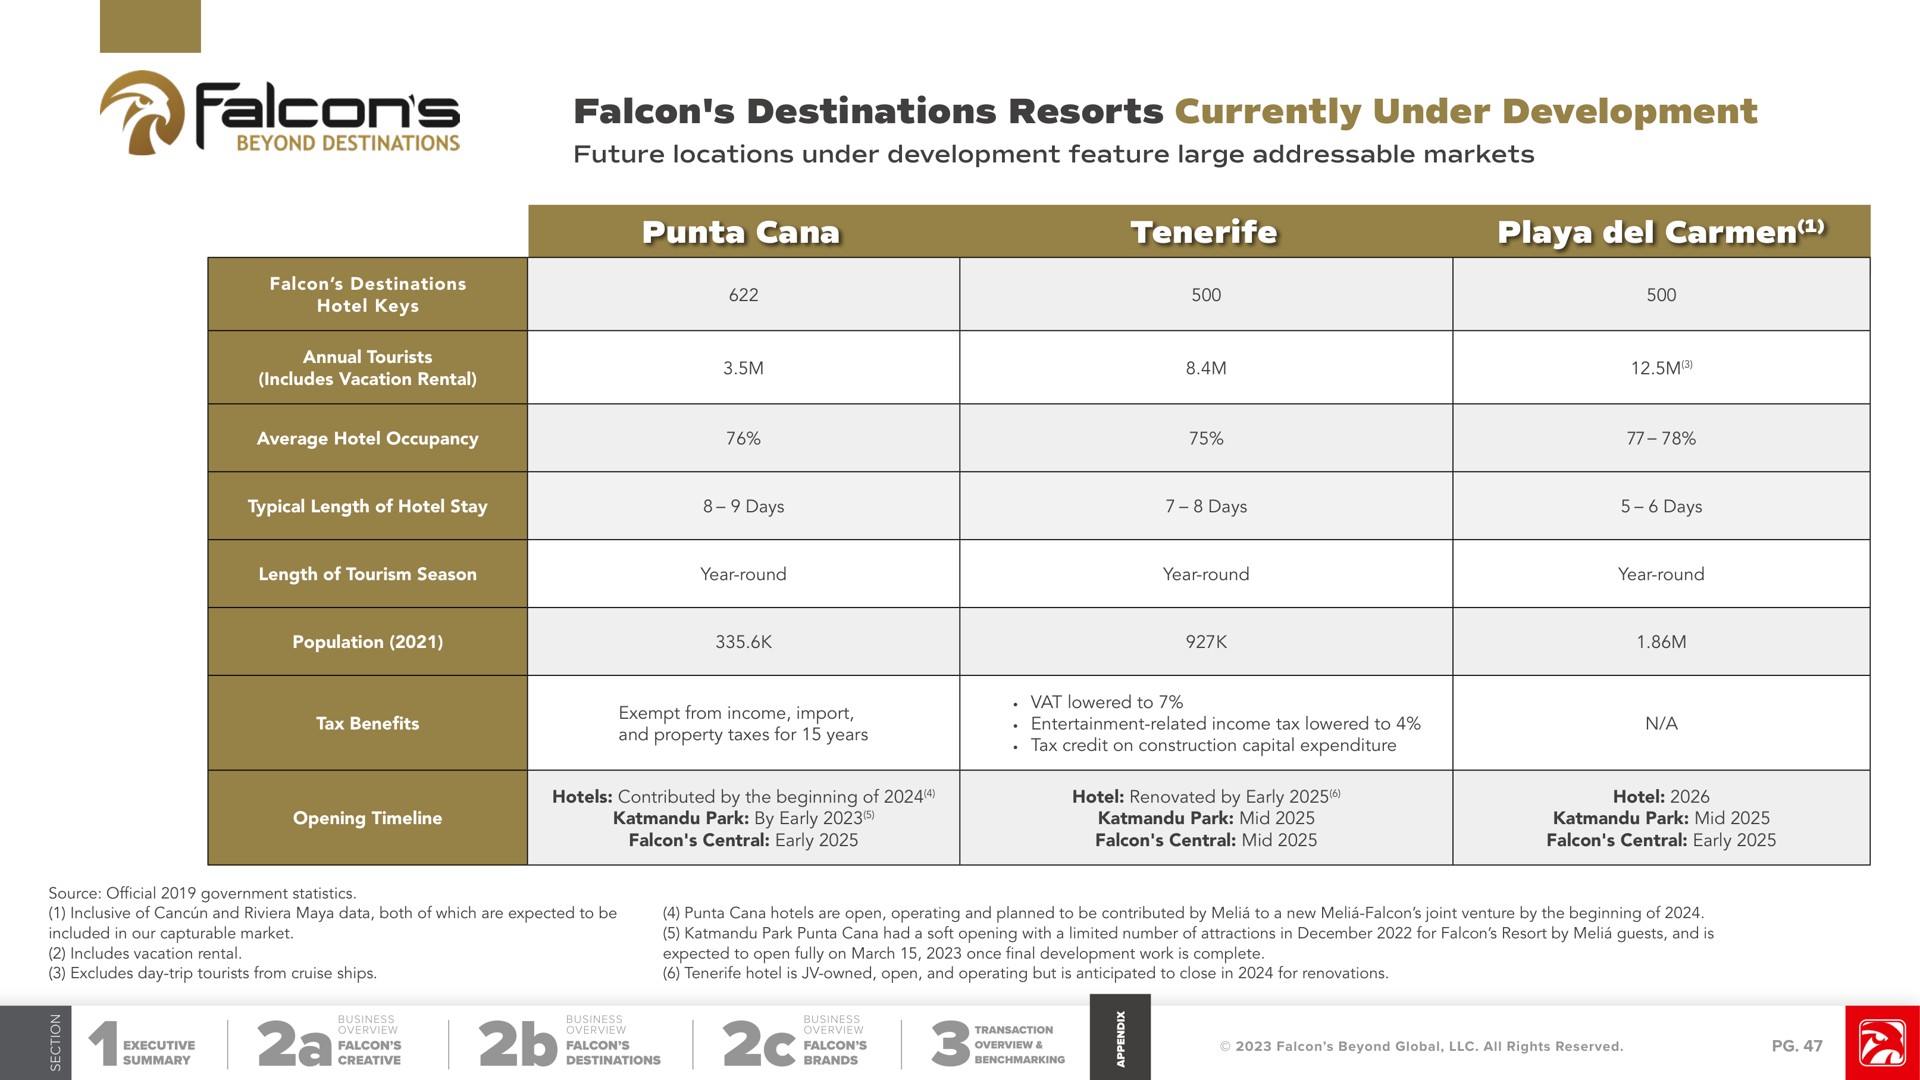 falcon destinations resorts currently under development future locations under development feature large markets punta playa falcons arise be | Falcon's Beyond